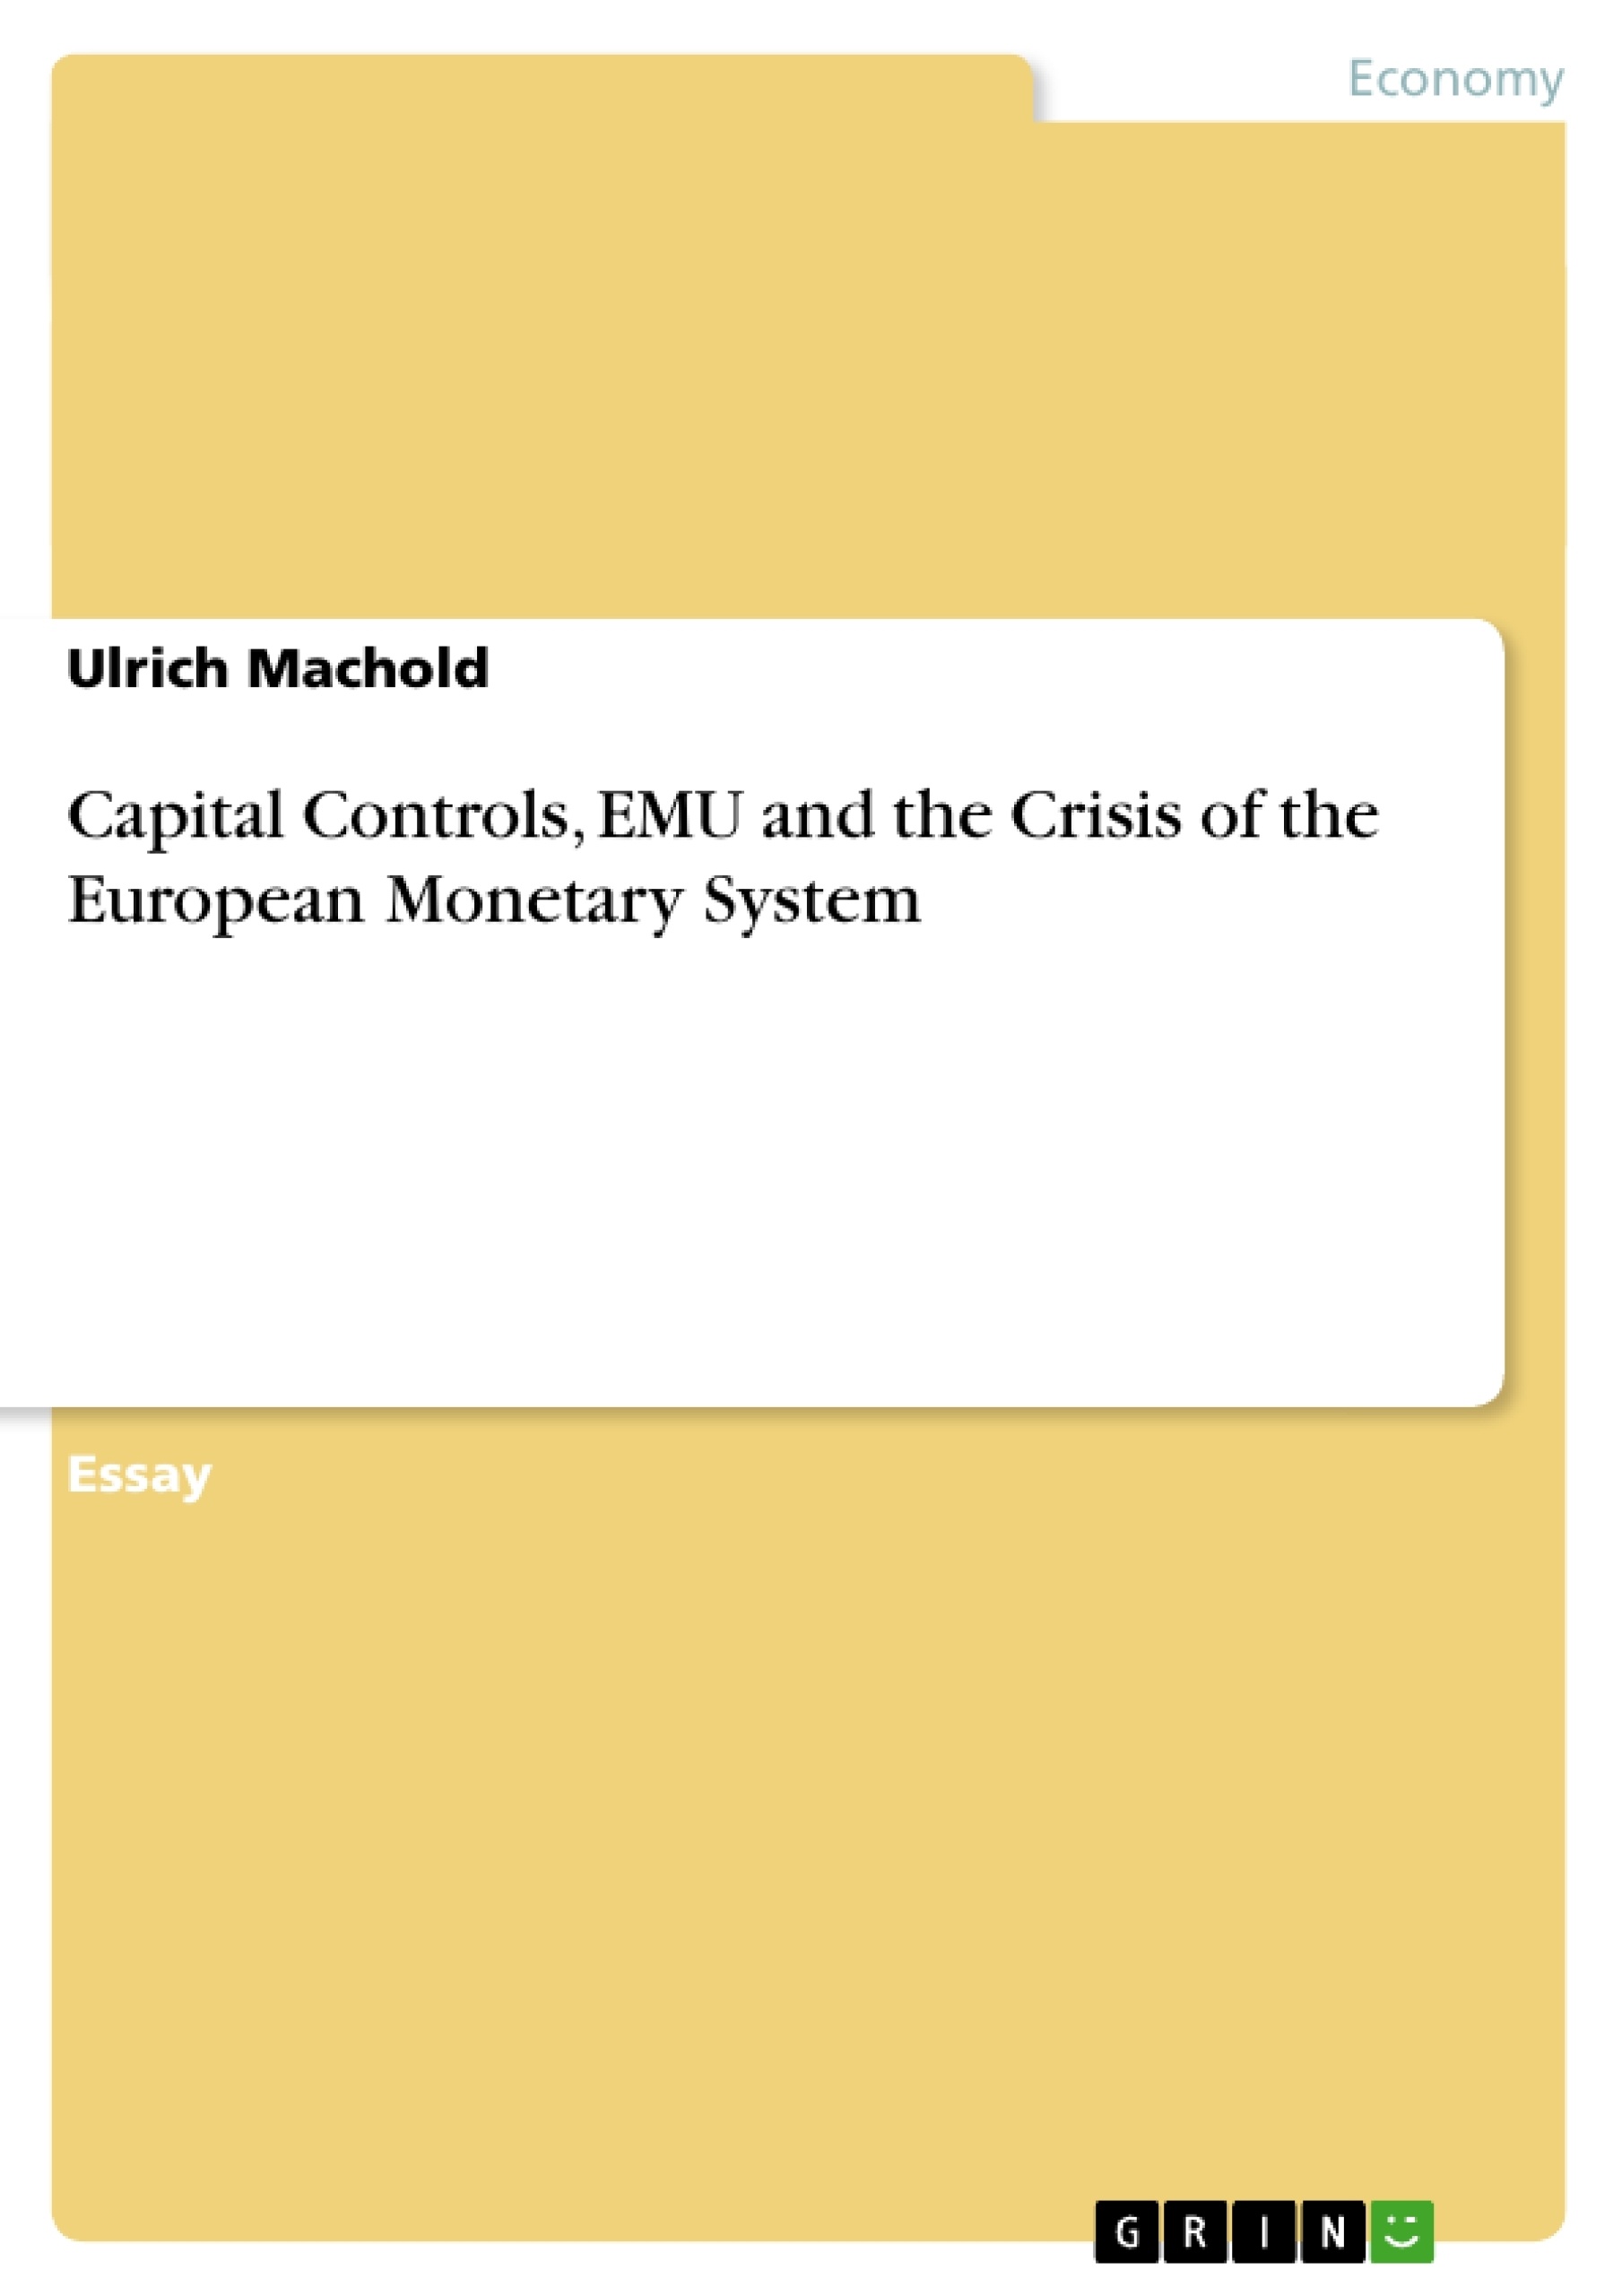 Titre: Capital Controls, EMU and the Crisis of the European Monetary System